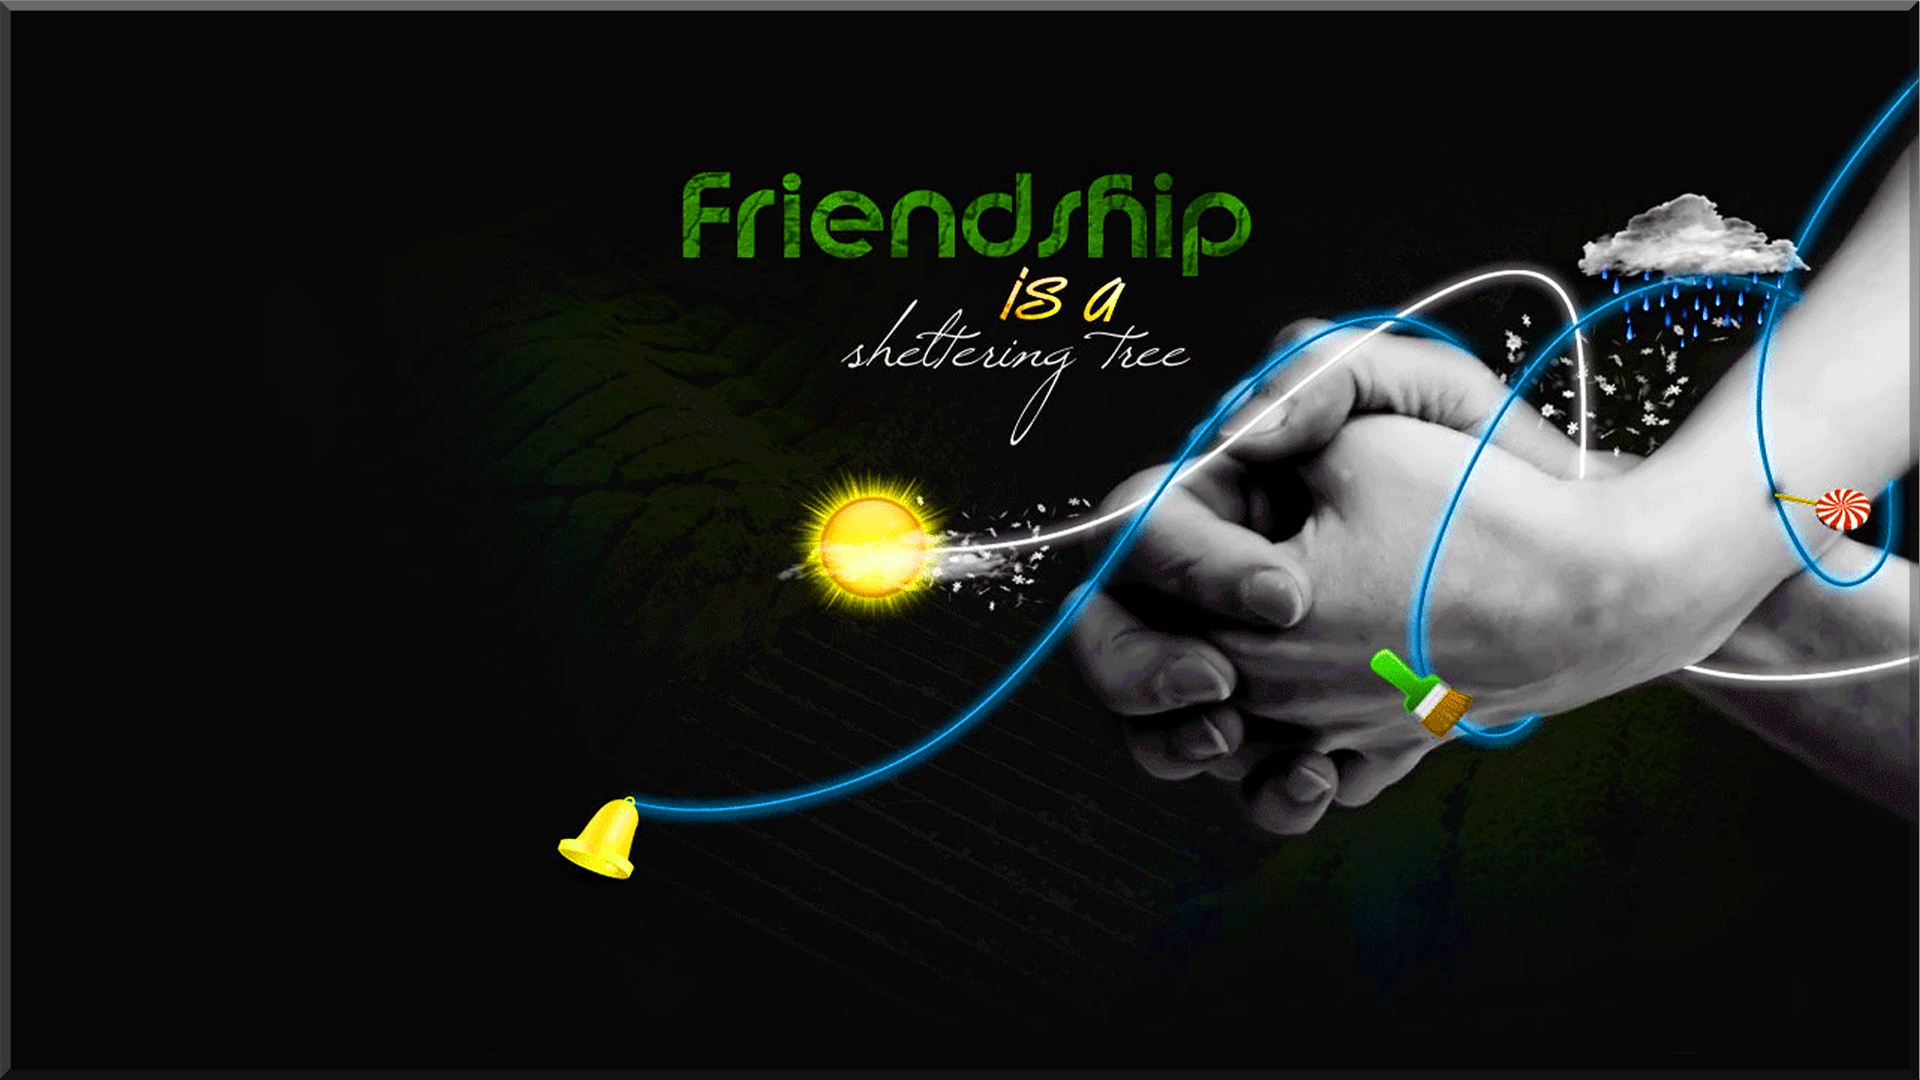 Friendship Quotes HD Wallpaper High